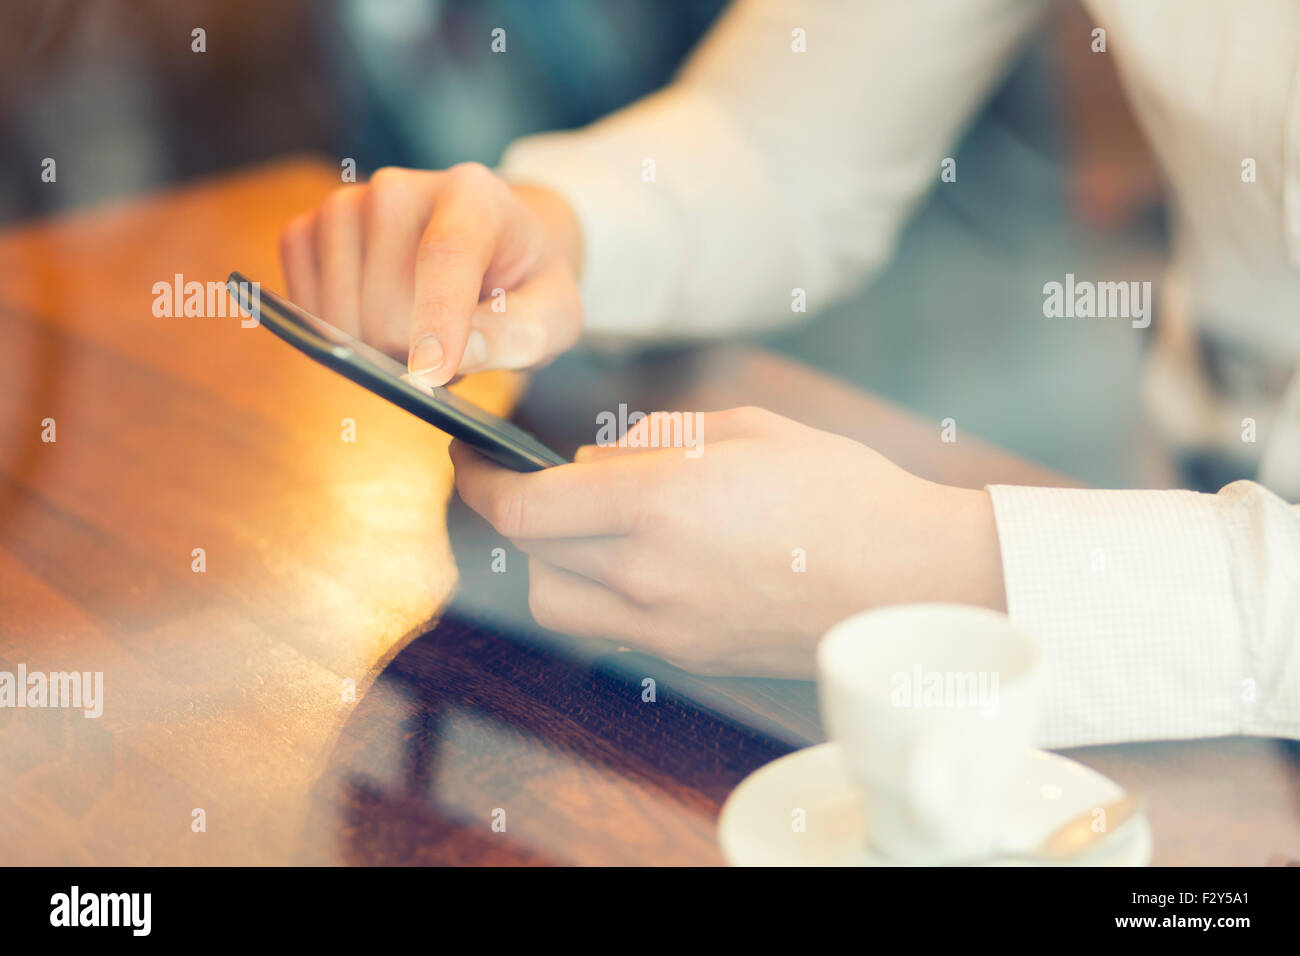 Man in a bar using mobile phone. Vintage filter Stock Photo